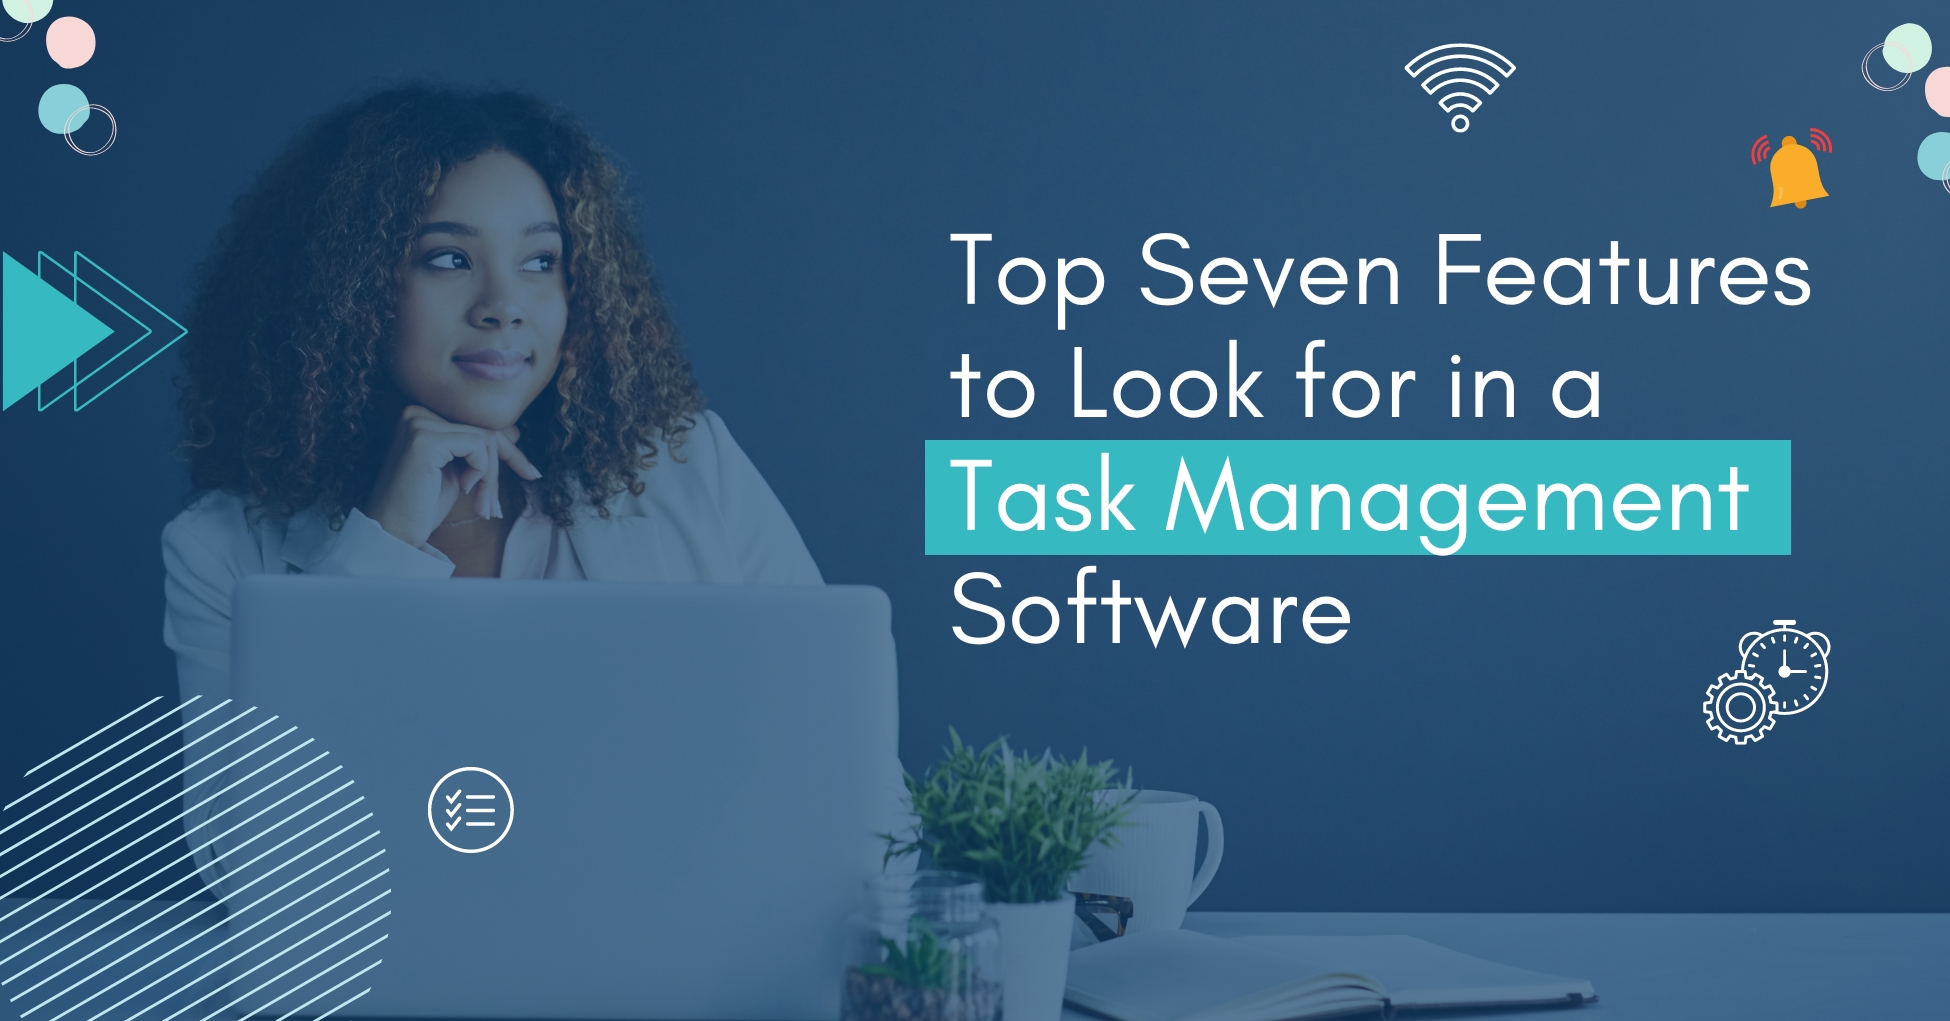 Top Seven Features to Look for in a Task Management Software